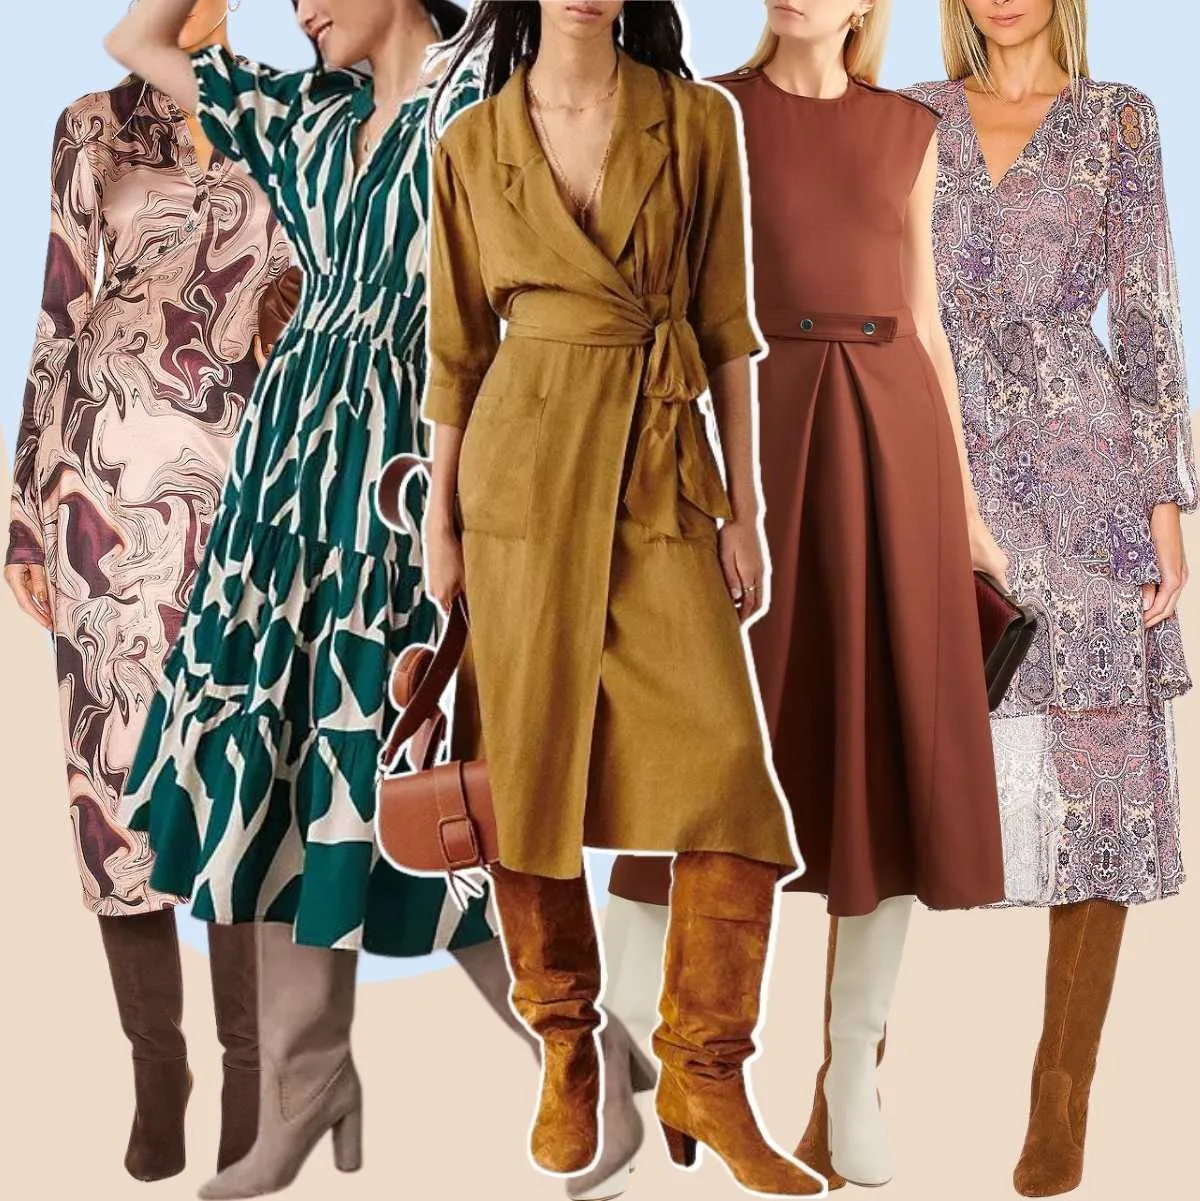 Collage of 5 women different knee boots with midi dresses.